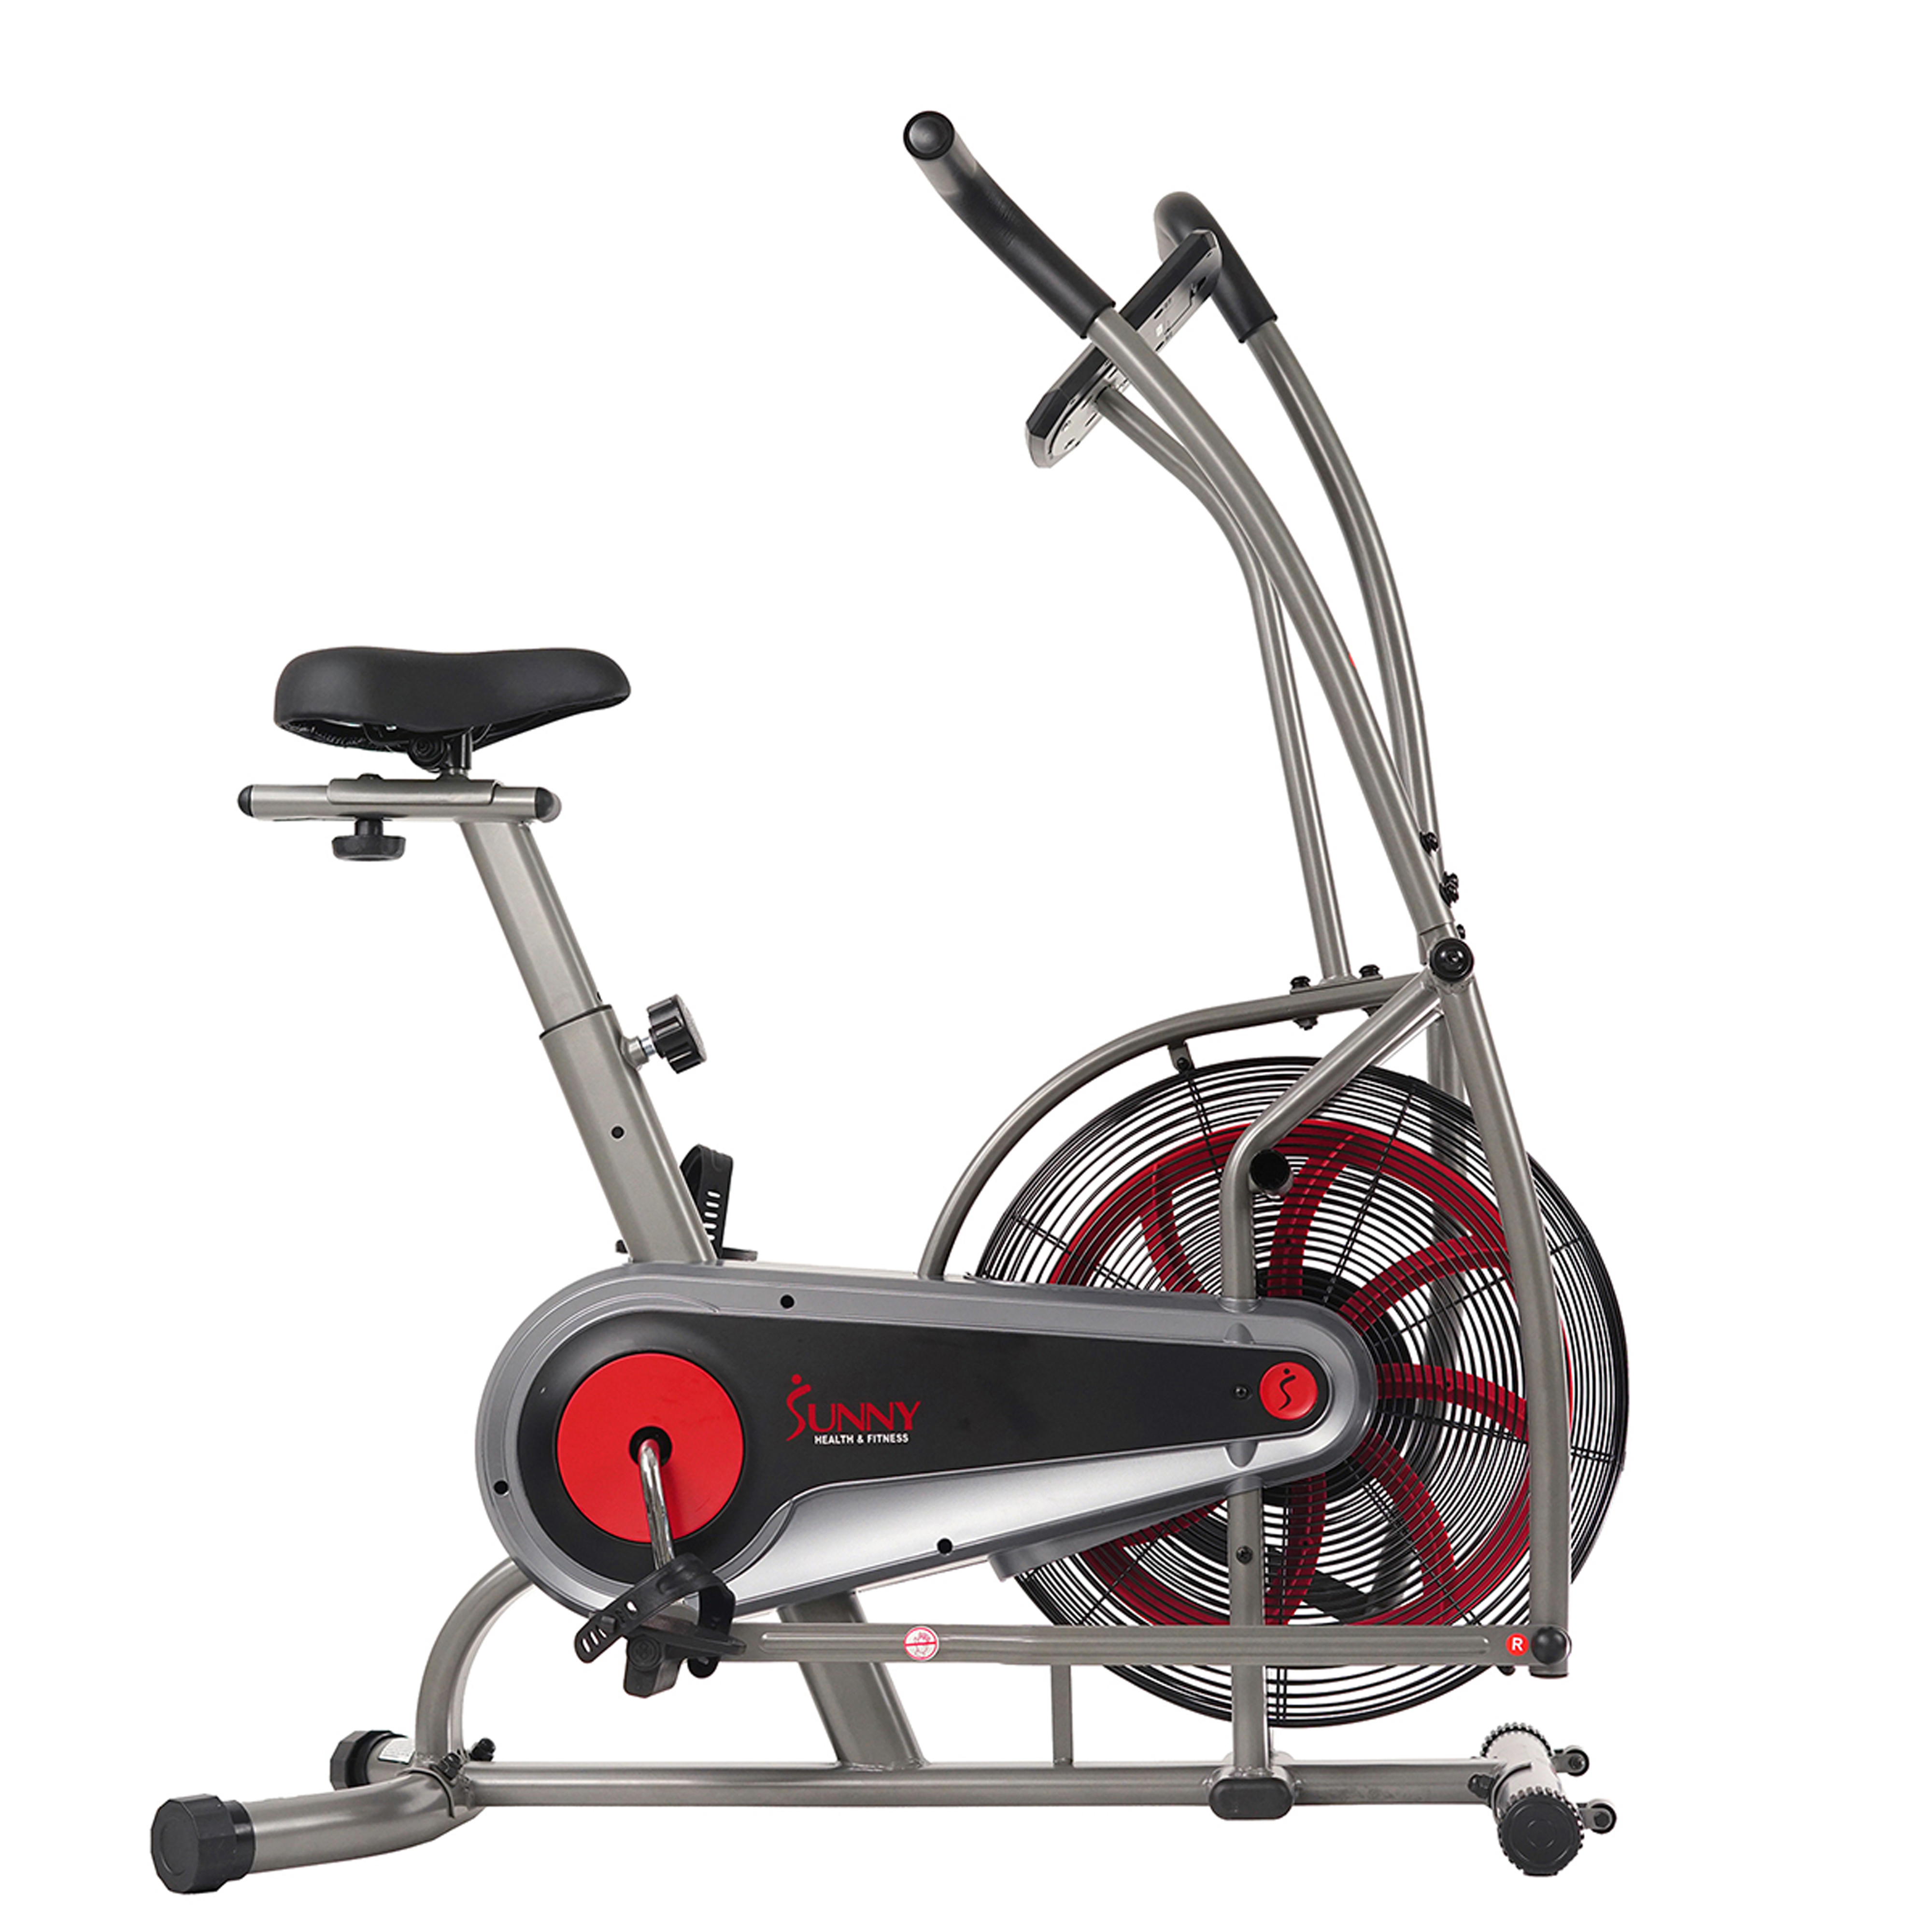 Sunny Health & Fitness Stationary Motion Fan Air Bike Exercise Machine, Indoor Home Cycling Trainer Static Bicycle, SF-B2916 - image 1 of 8